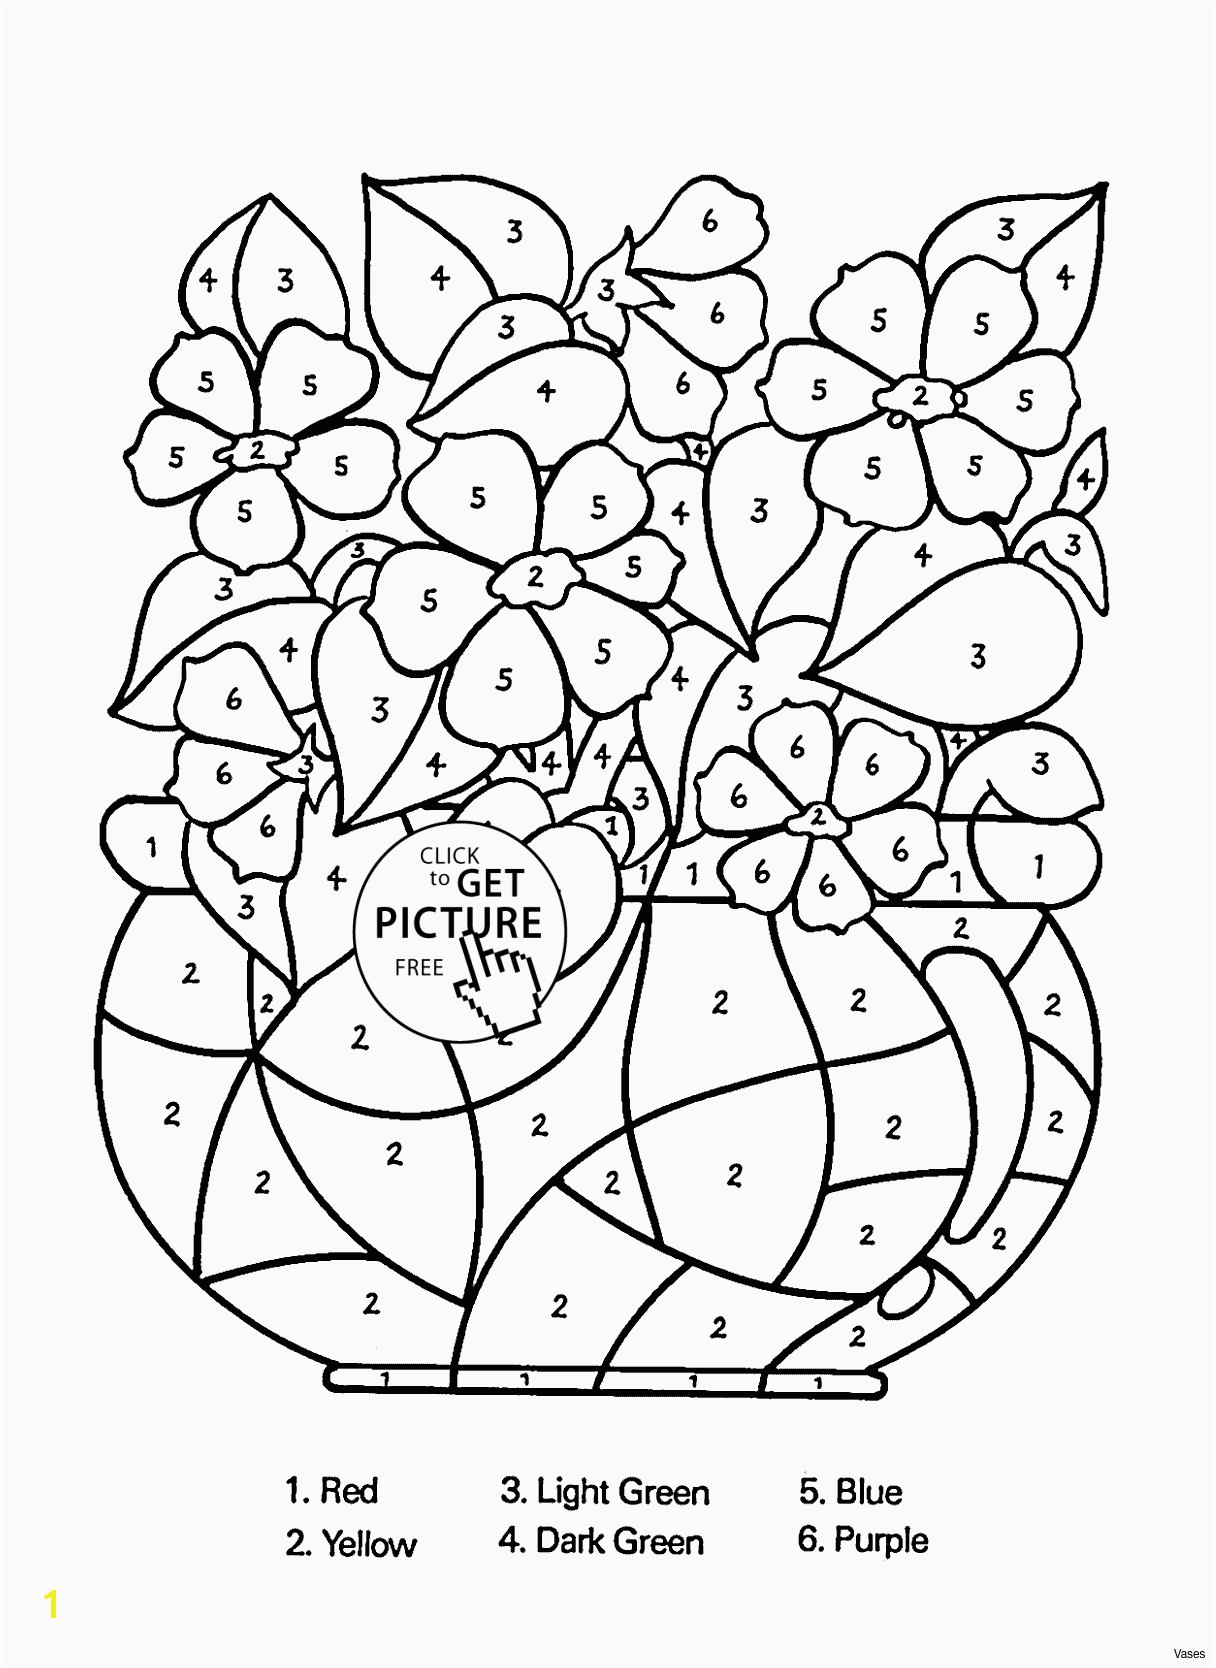 Alphabet Coloring Pages Printable 6a To print for your project